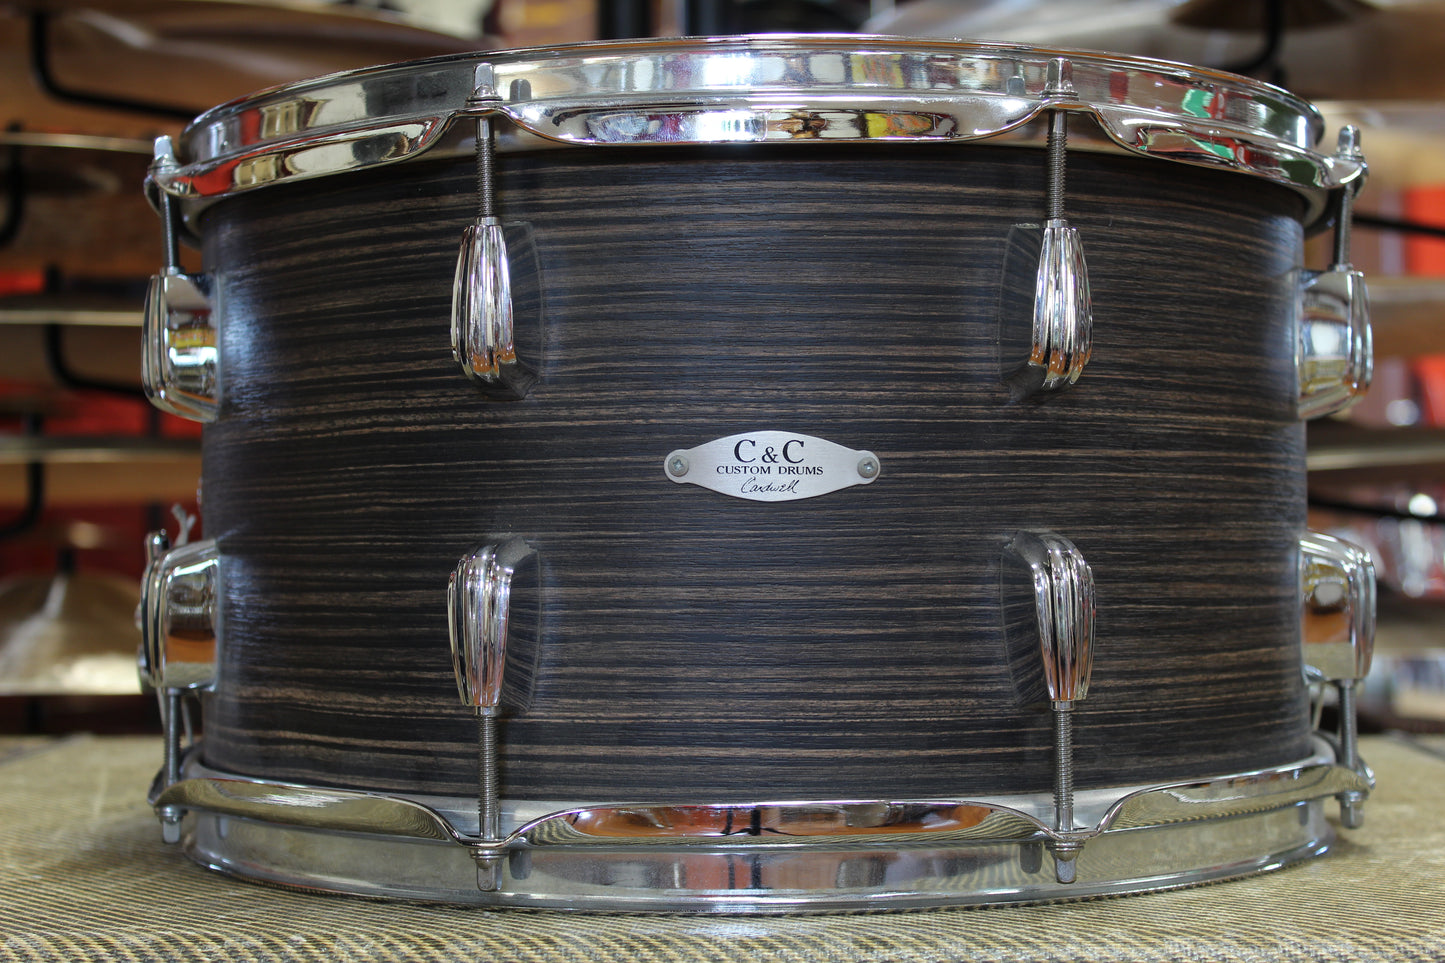 C&C Drum Company 8x14 Mahogany Snare Drum in Ebony Oyster